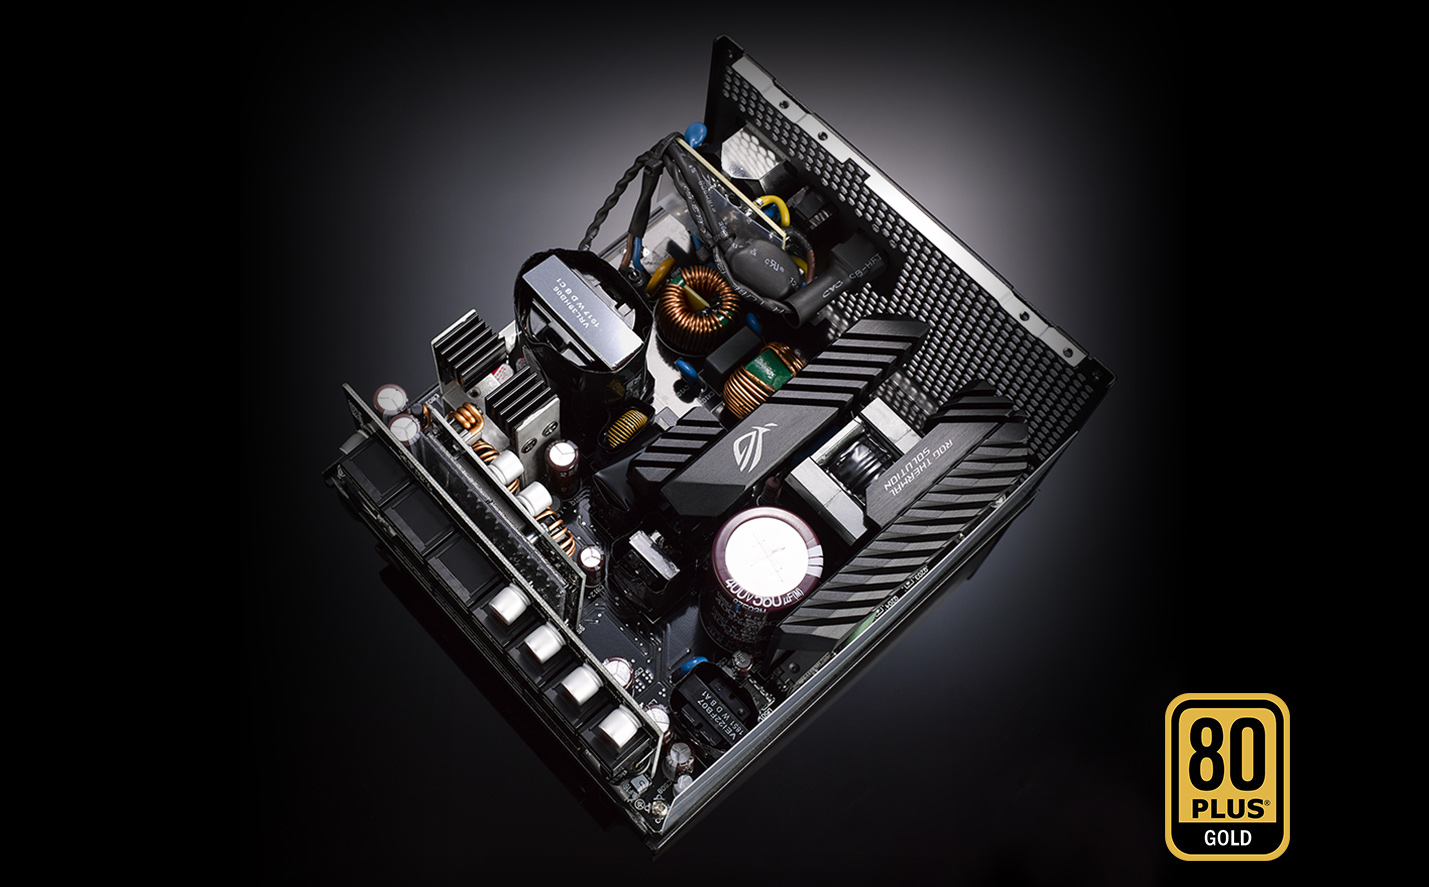 ROG Strix 750W Gold internal structure with 80 PLUS gold certification